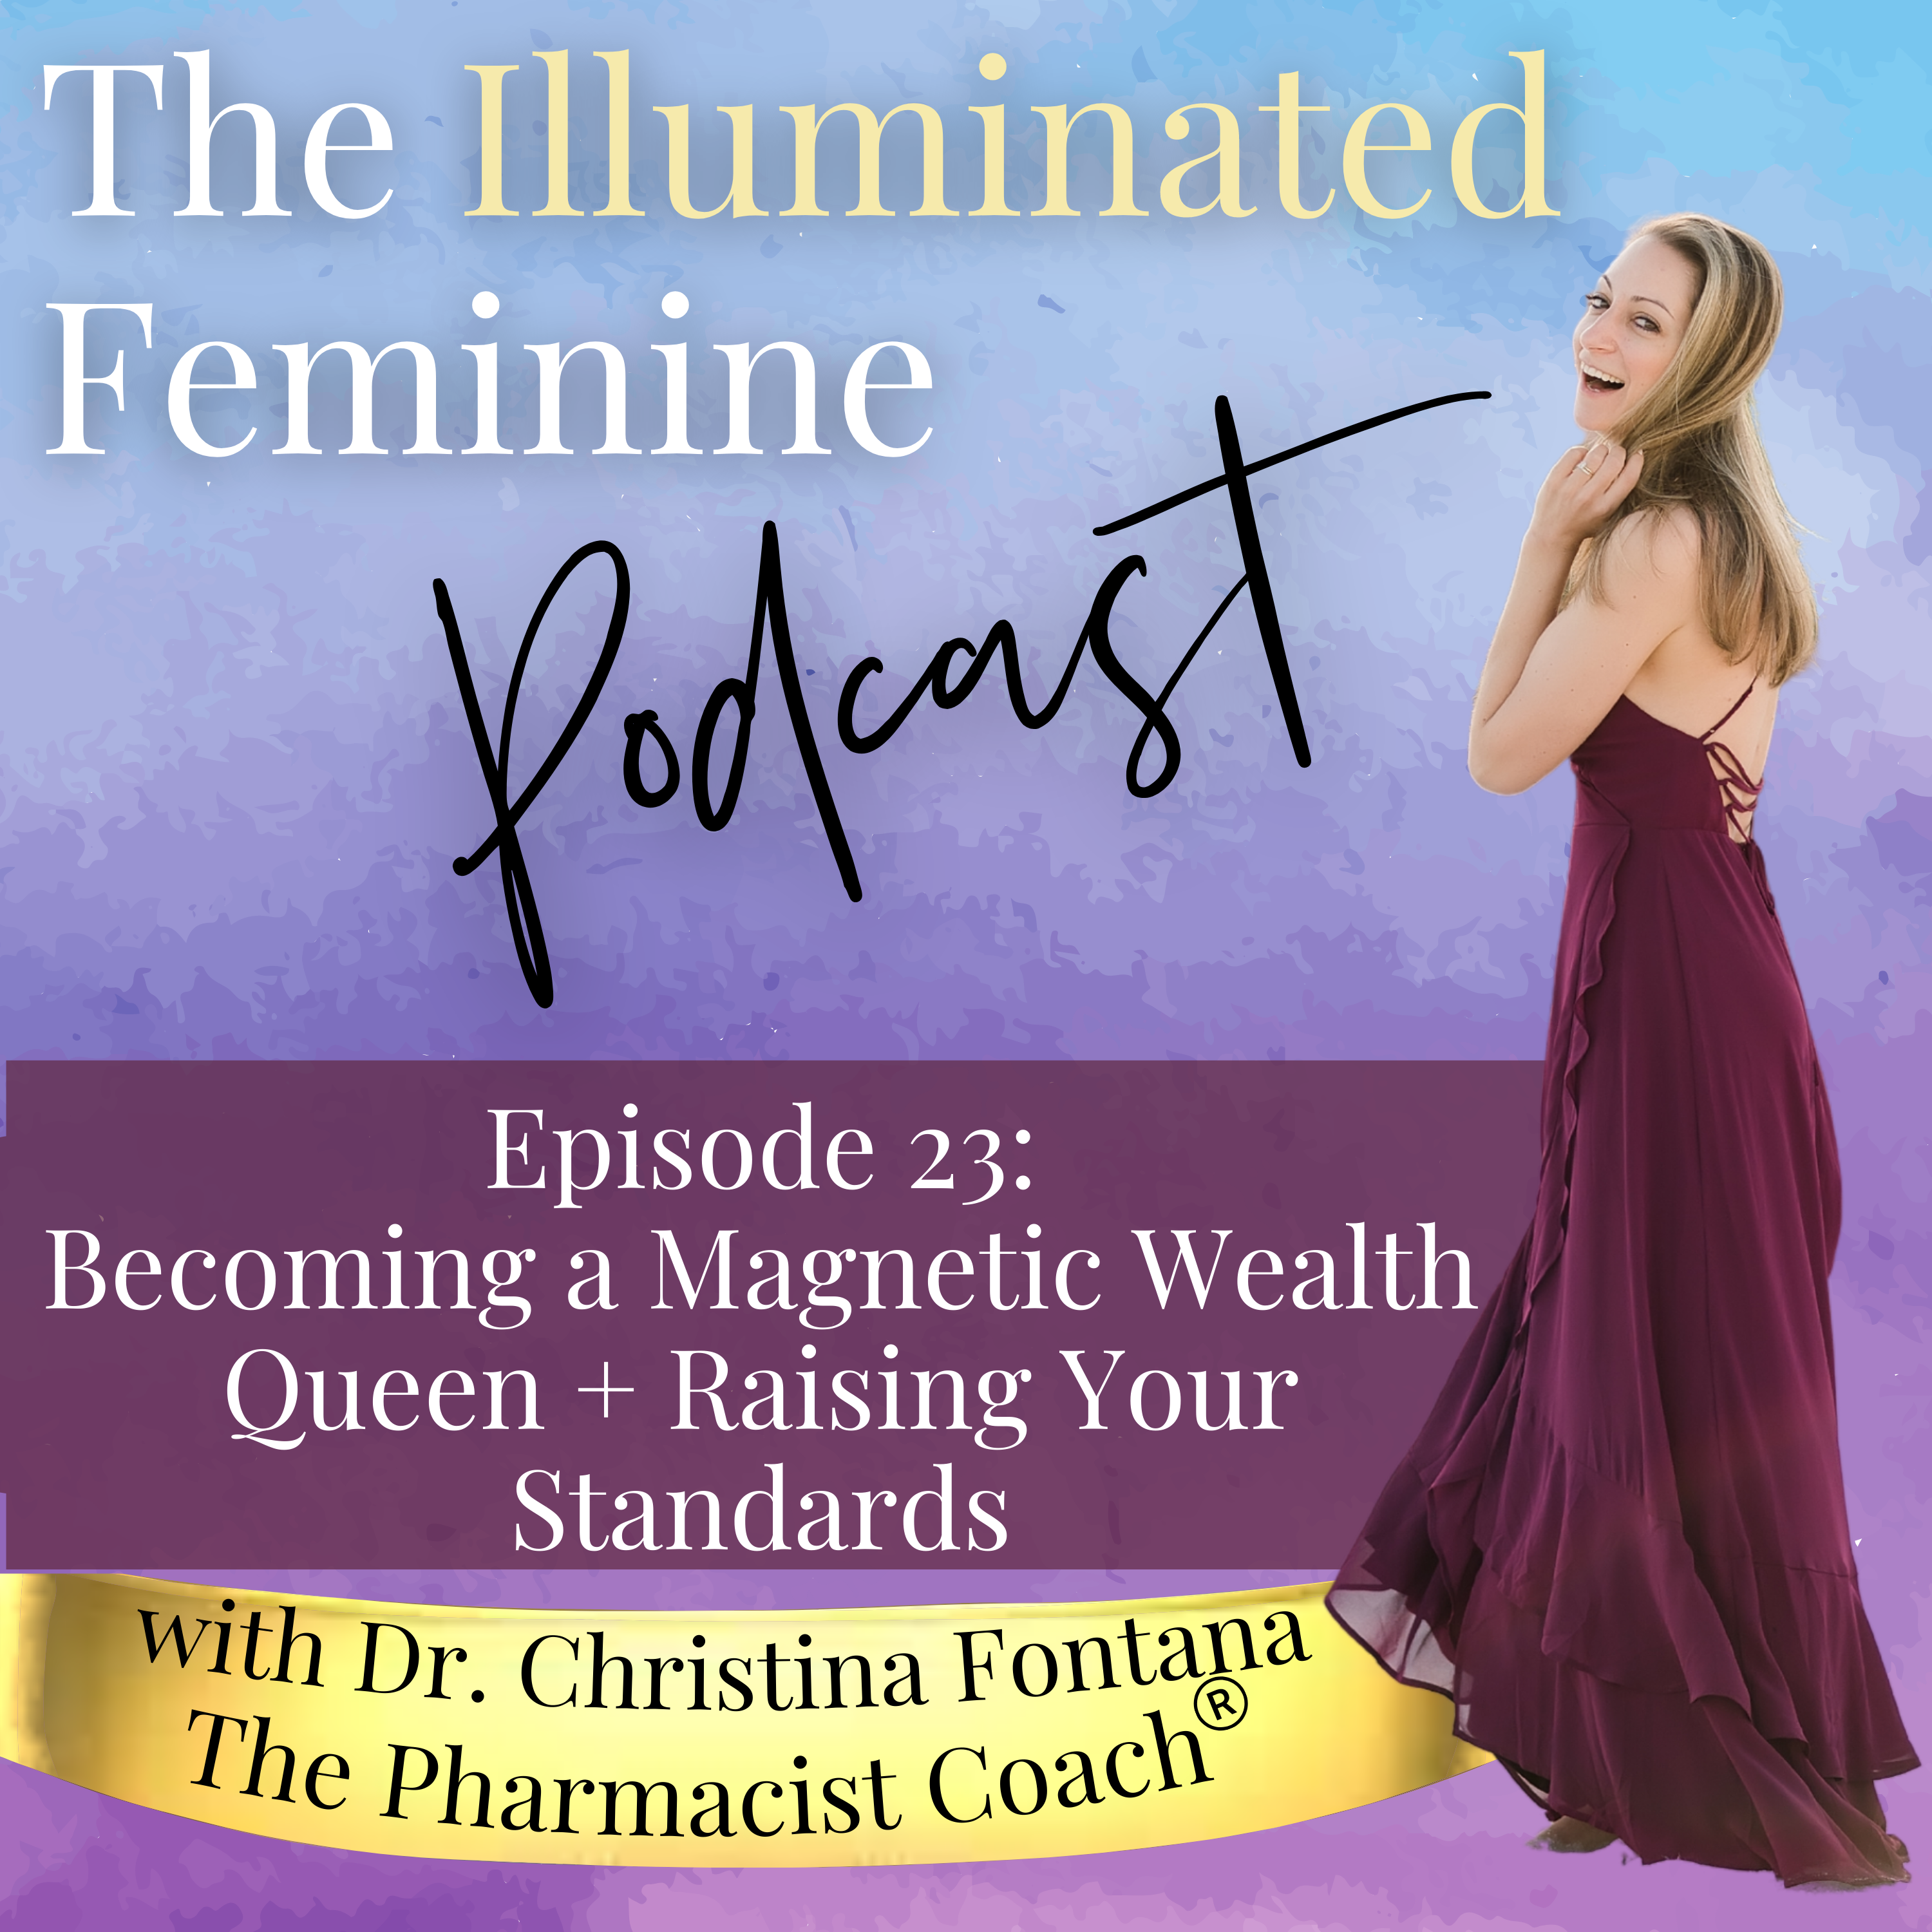 Featured image for “Illuminated Feminine Podcast Episode 23. Becoming a Magnetic Wealth Queen + Raising Your Standards”